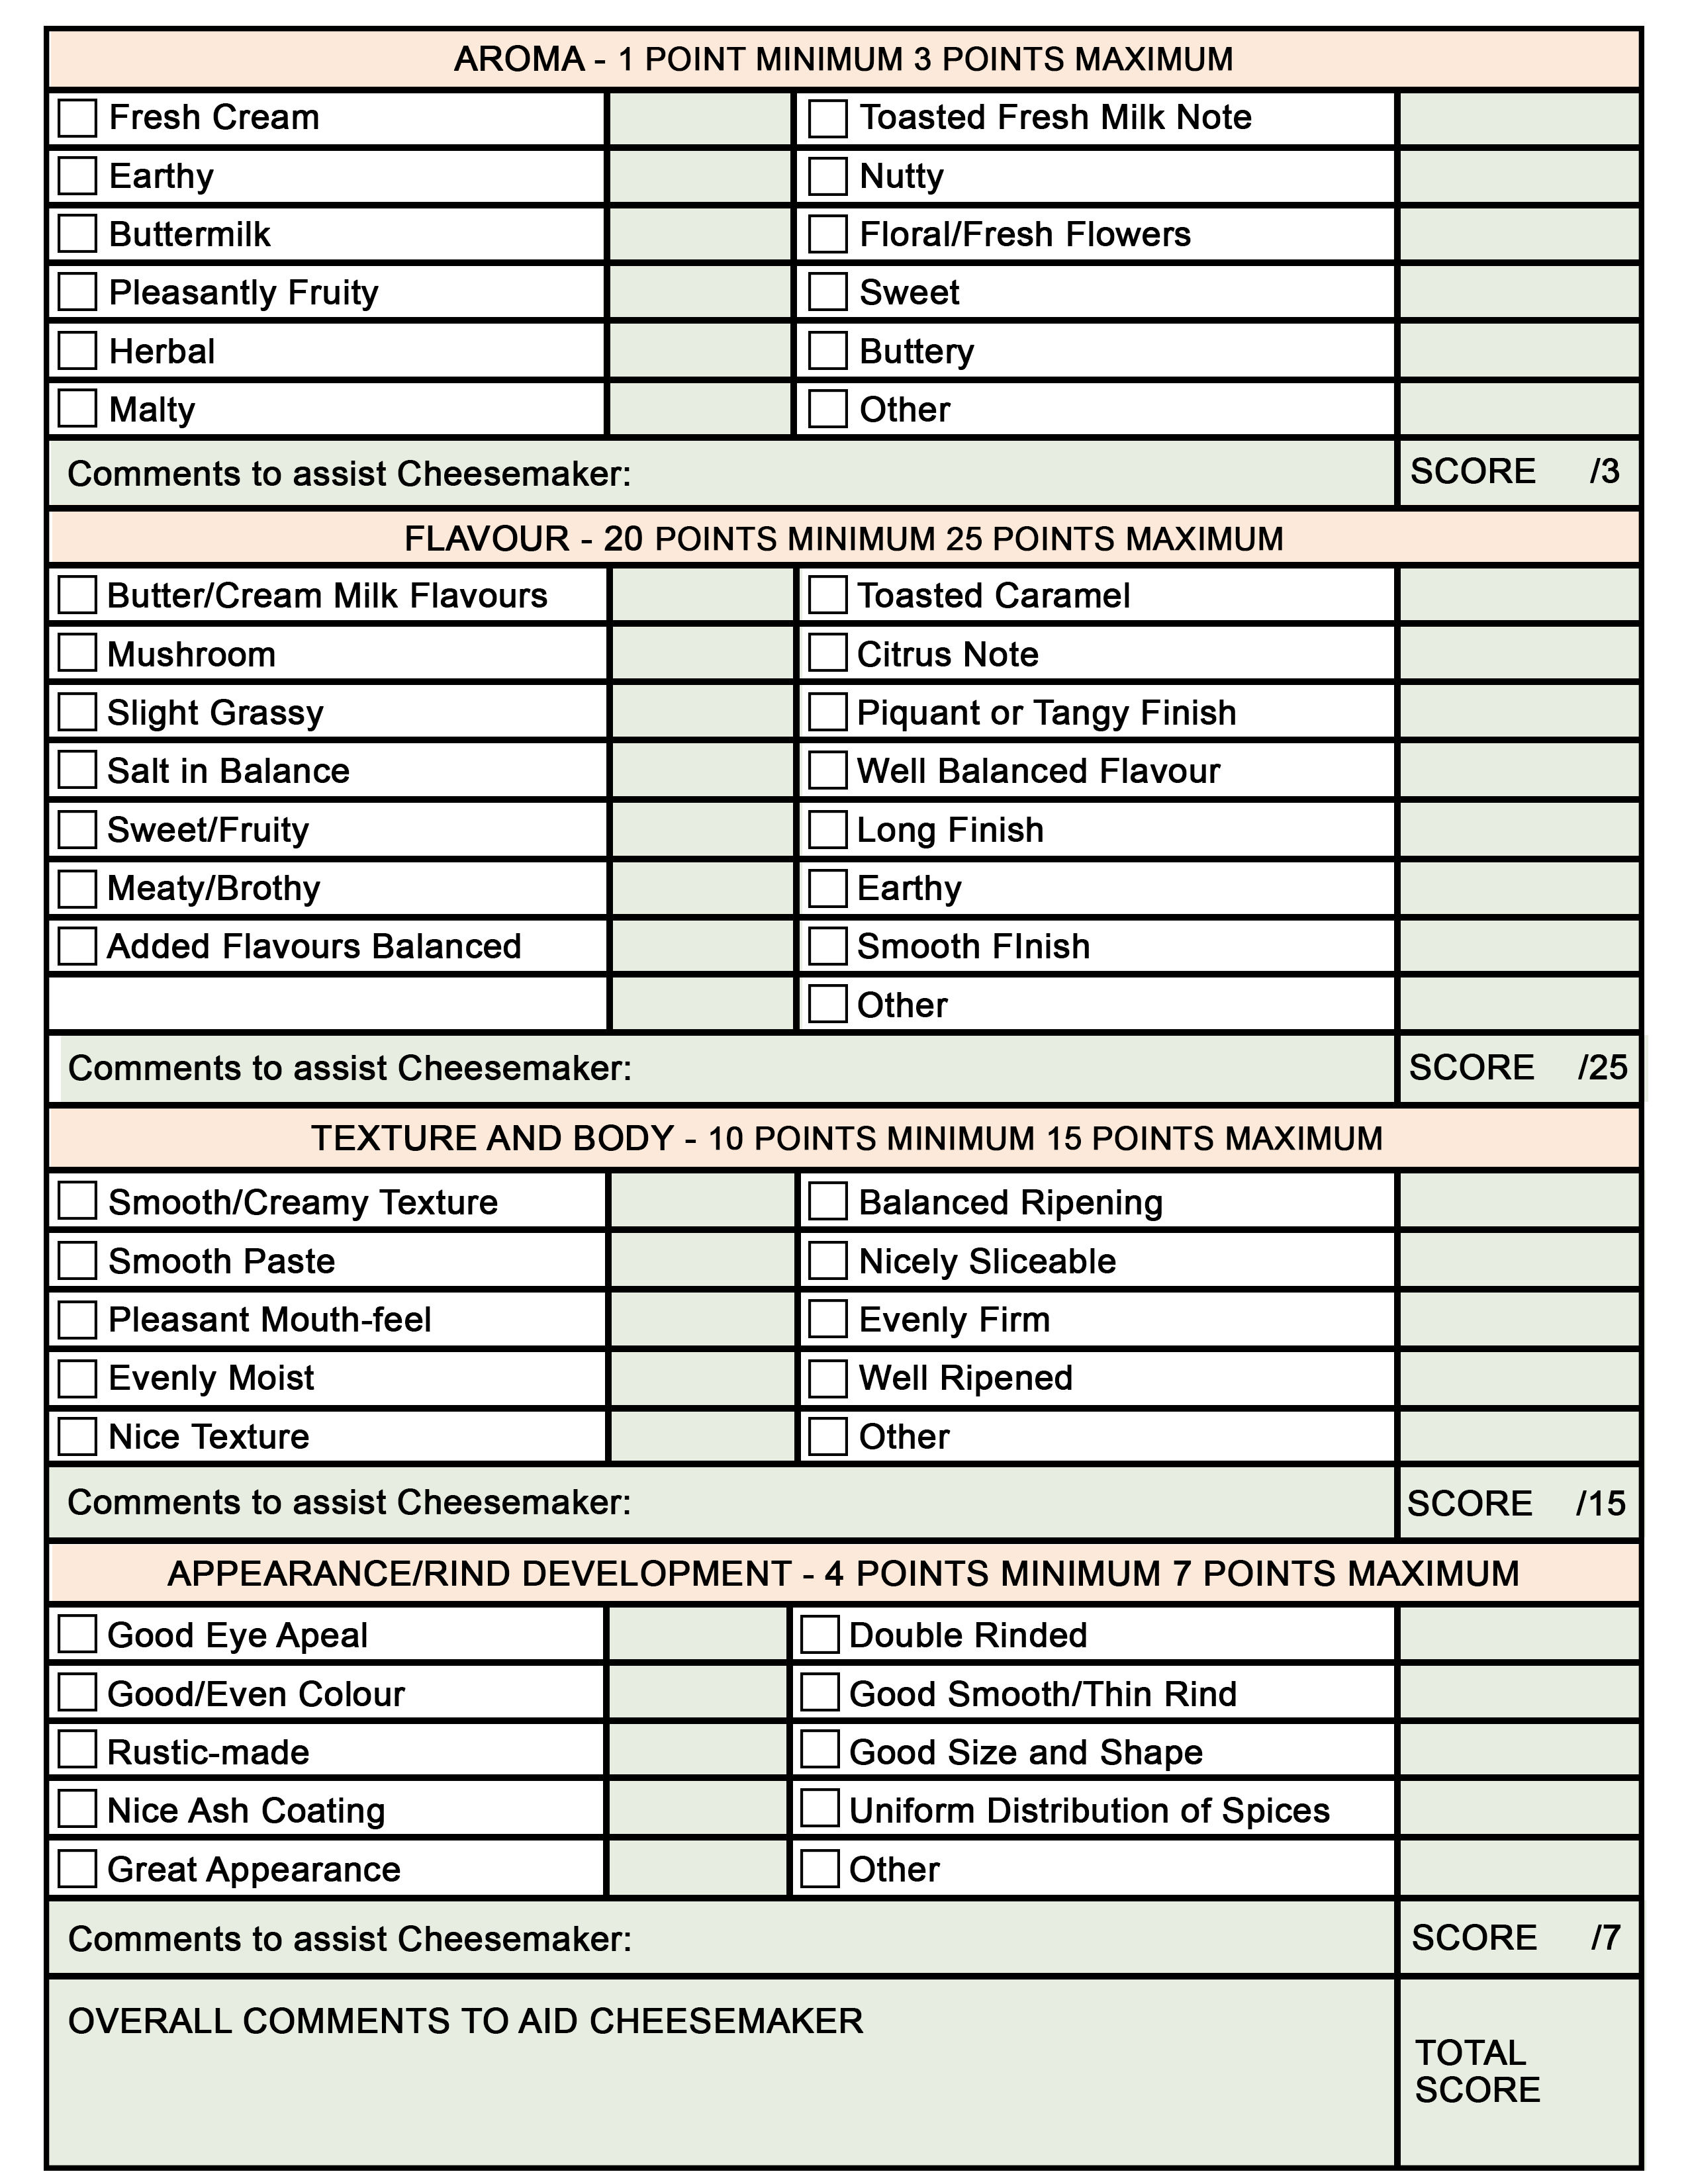  Figure 13.1: Technical cheese judging Score Card. The technical score judging card is similar to the traditional defect based grading, which deducts points for defects in each category. Most current cheese judging employs both a technical and an aesthetic judge. The technical judge sums the points for each category to obtain a total score out of 50. This score is then added to the aesthetic score (see table 13.2) for a total score our of 100.